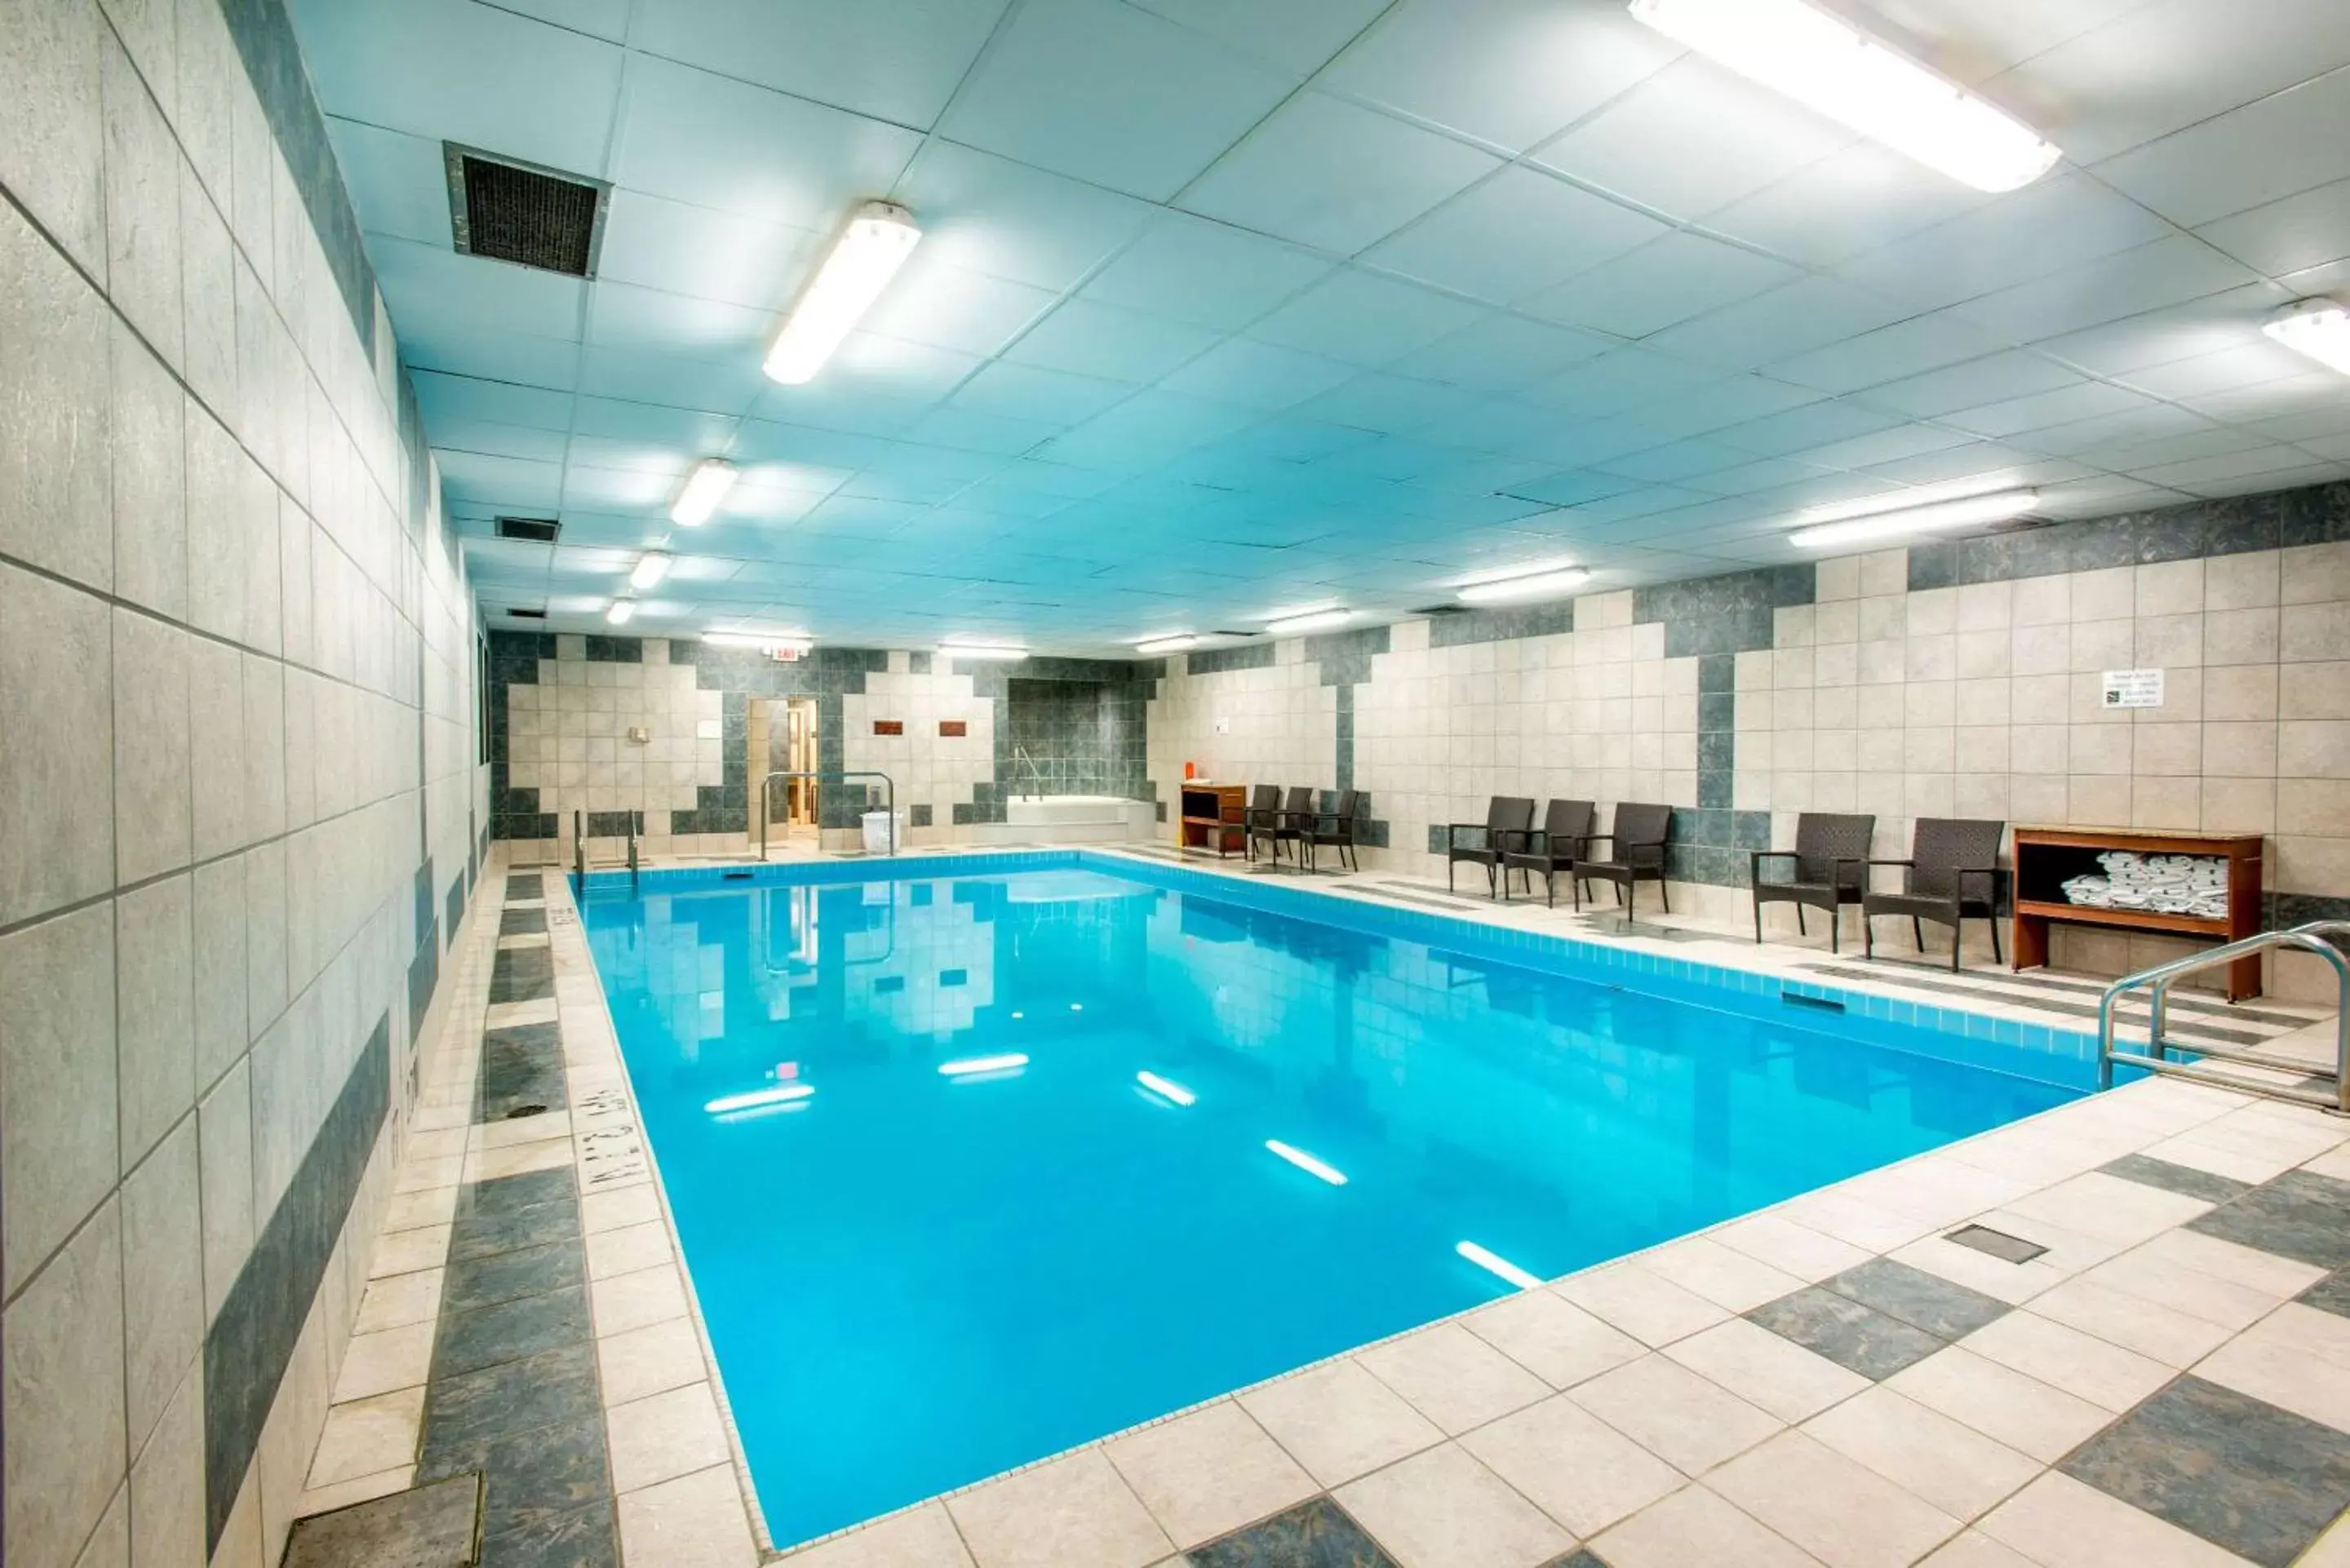 On site, Swimming Pool in Quality Inn Halifax Airport